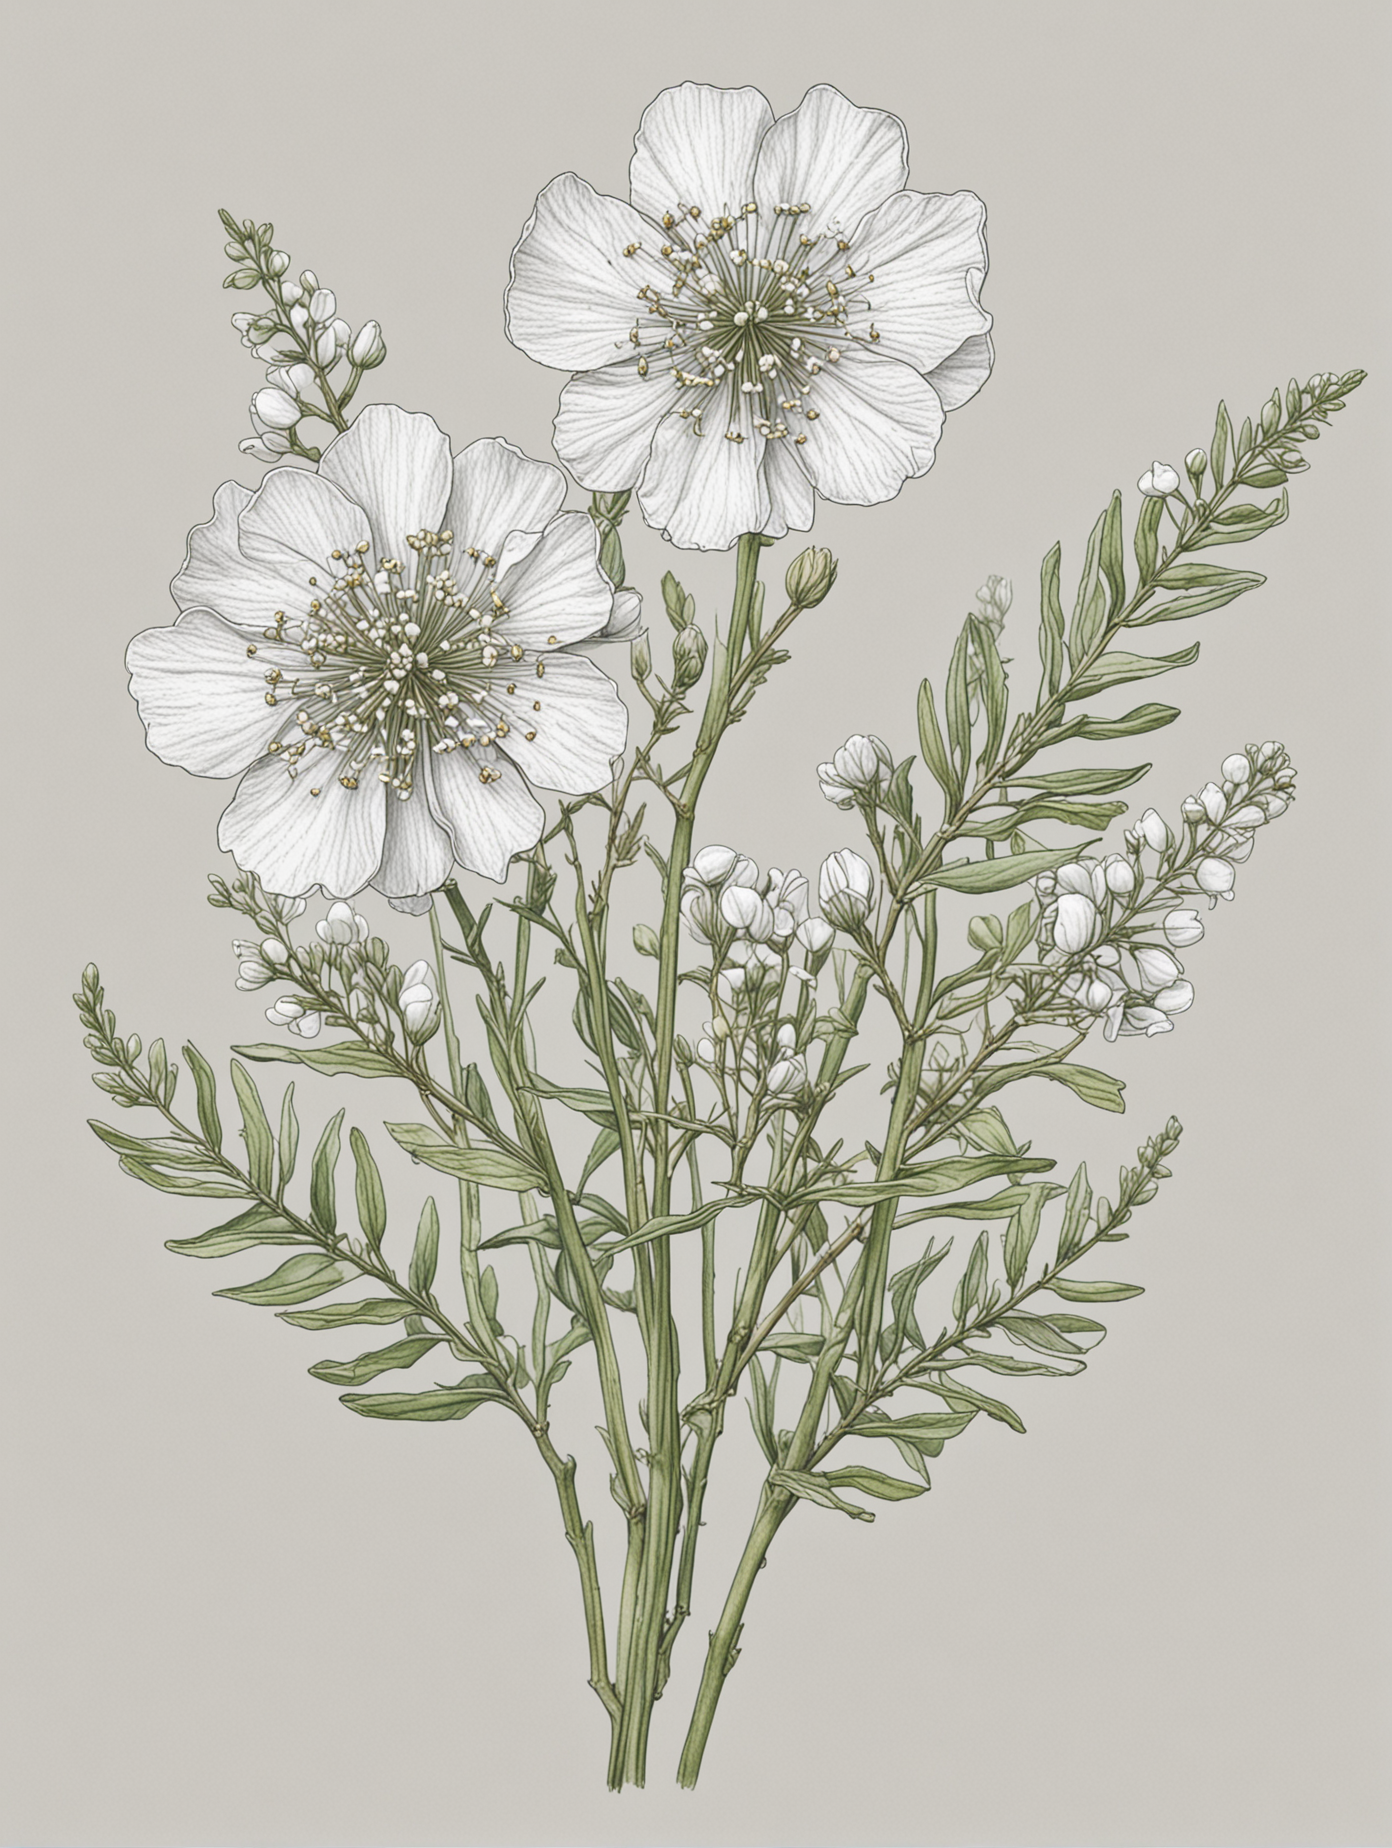 Botanical Drawing of Gypsophila for Adult Coloring Book Tranquil Floral Illustration